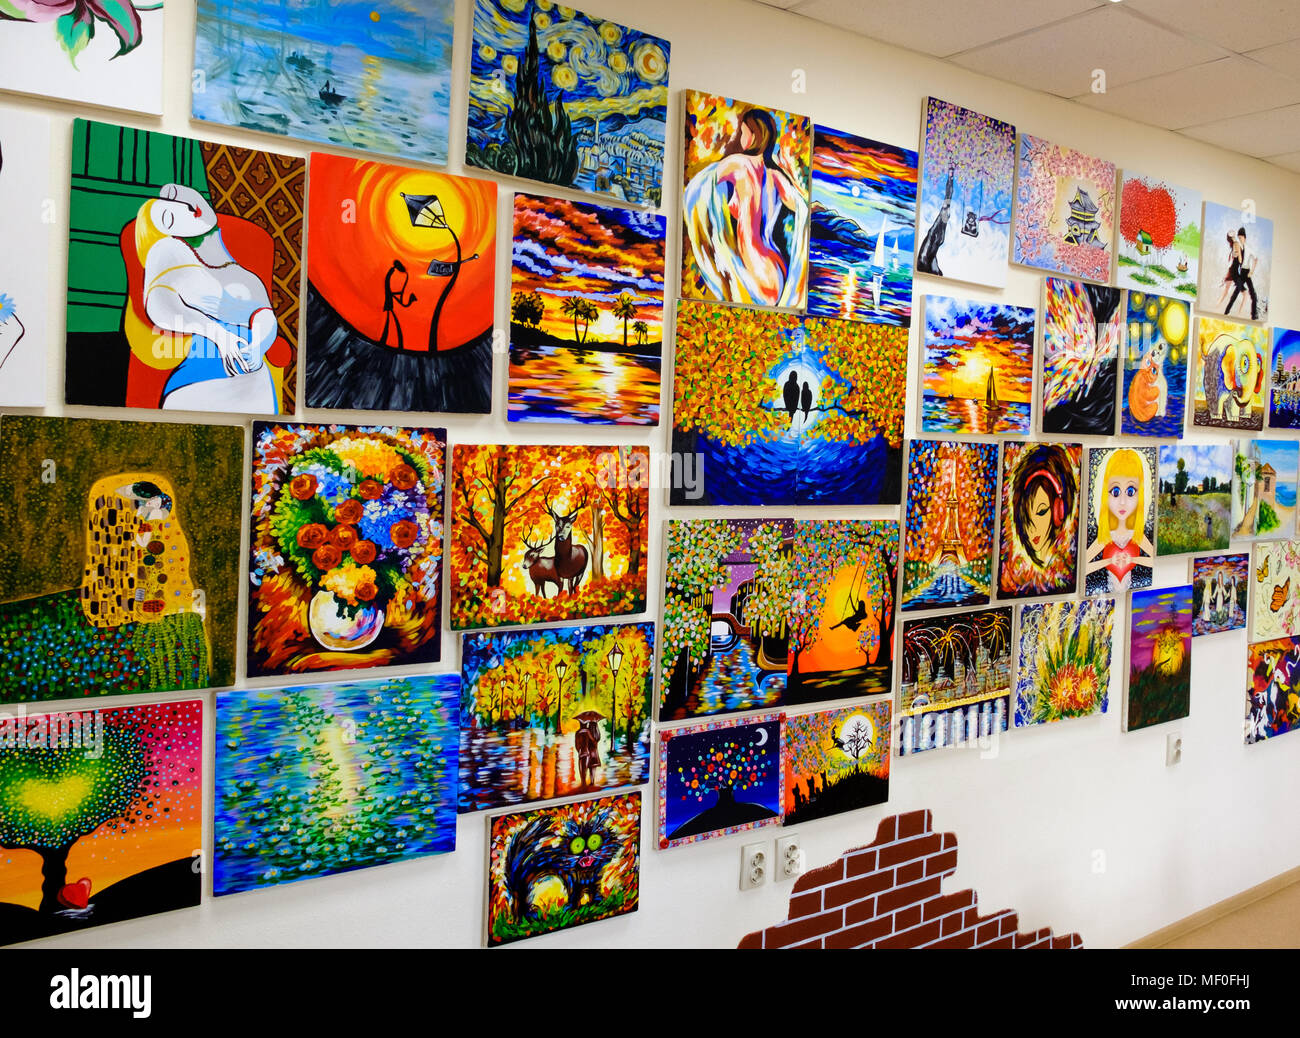 KIROV, RUSSIA - AUGUST 7, 2017: Many beautiful vibrant paintings on the wall of a local art studio, originals and replicas Stock Photo